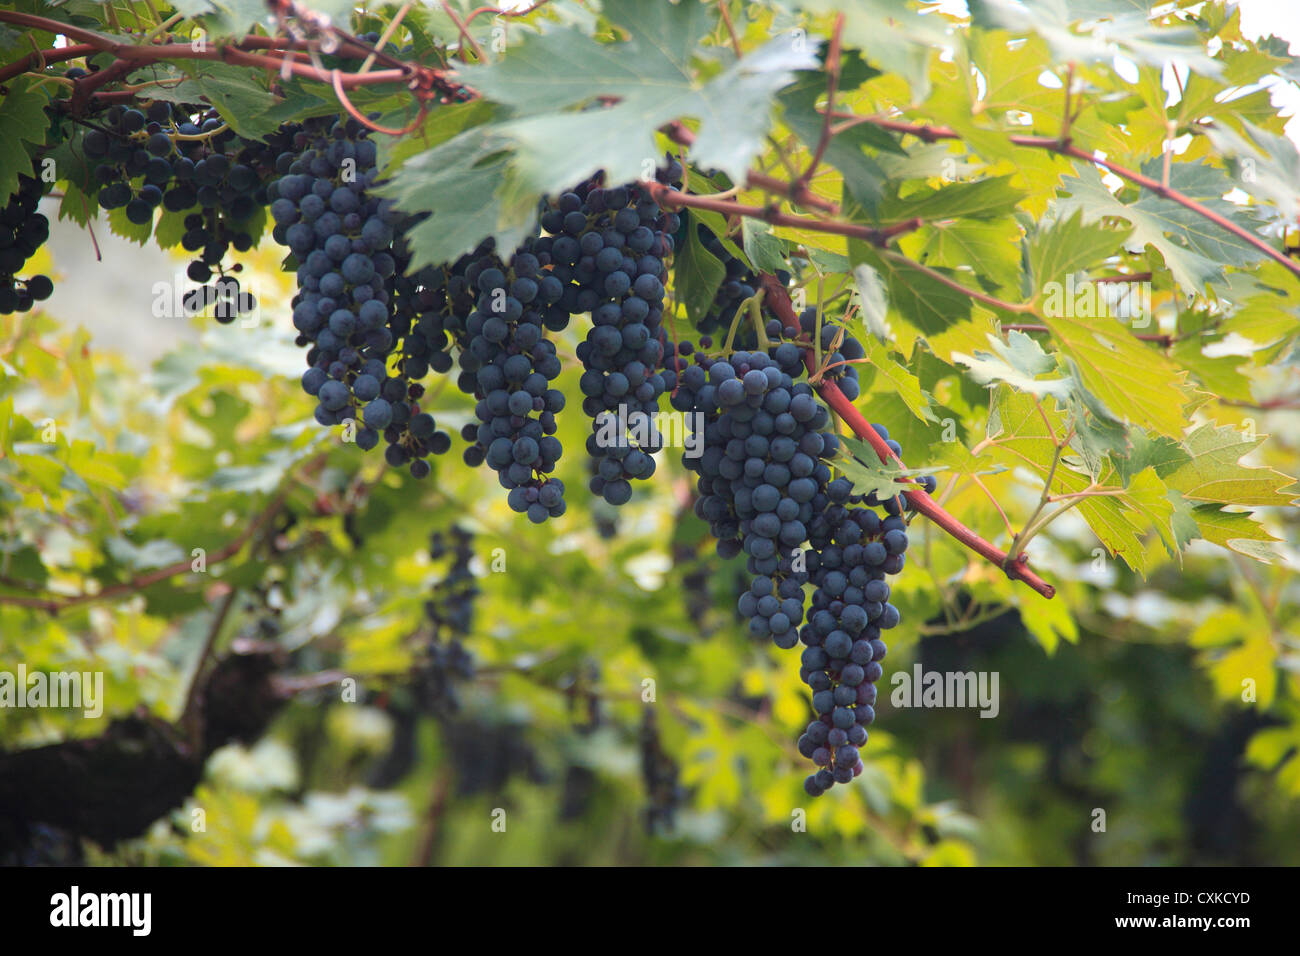 Blue black barbera grapes hanging from a tall vine. Stock Photo